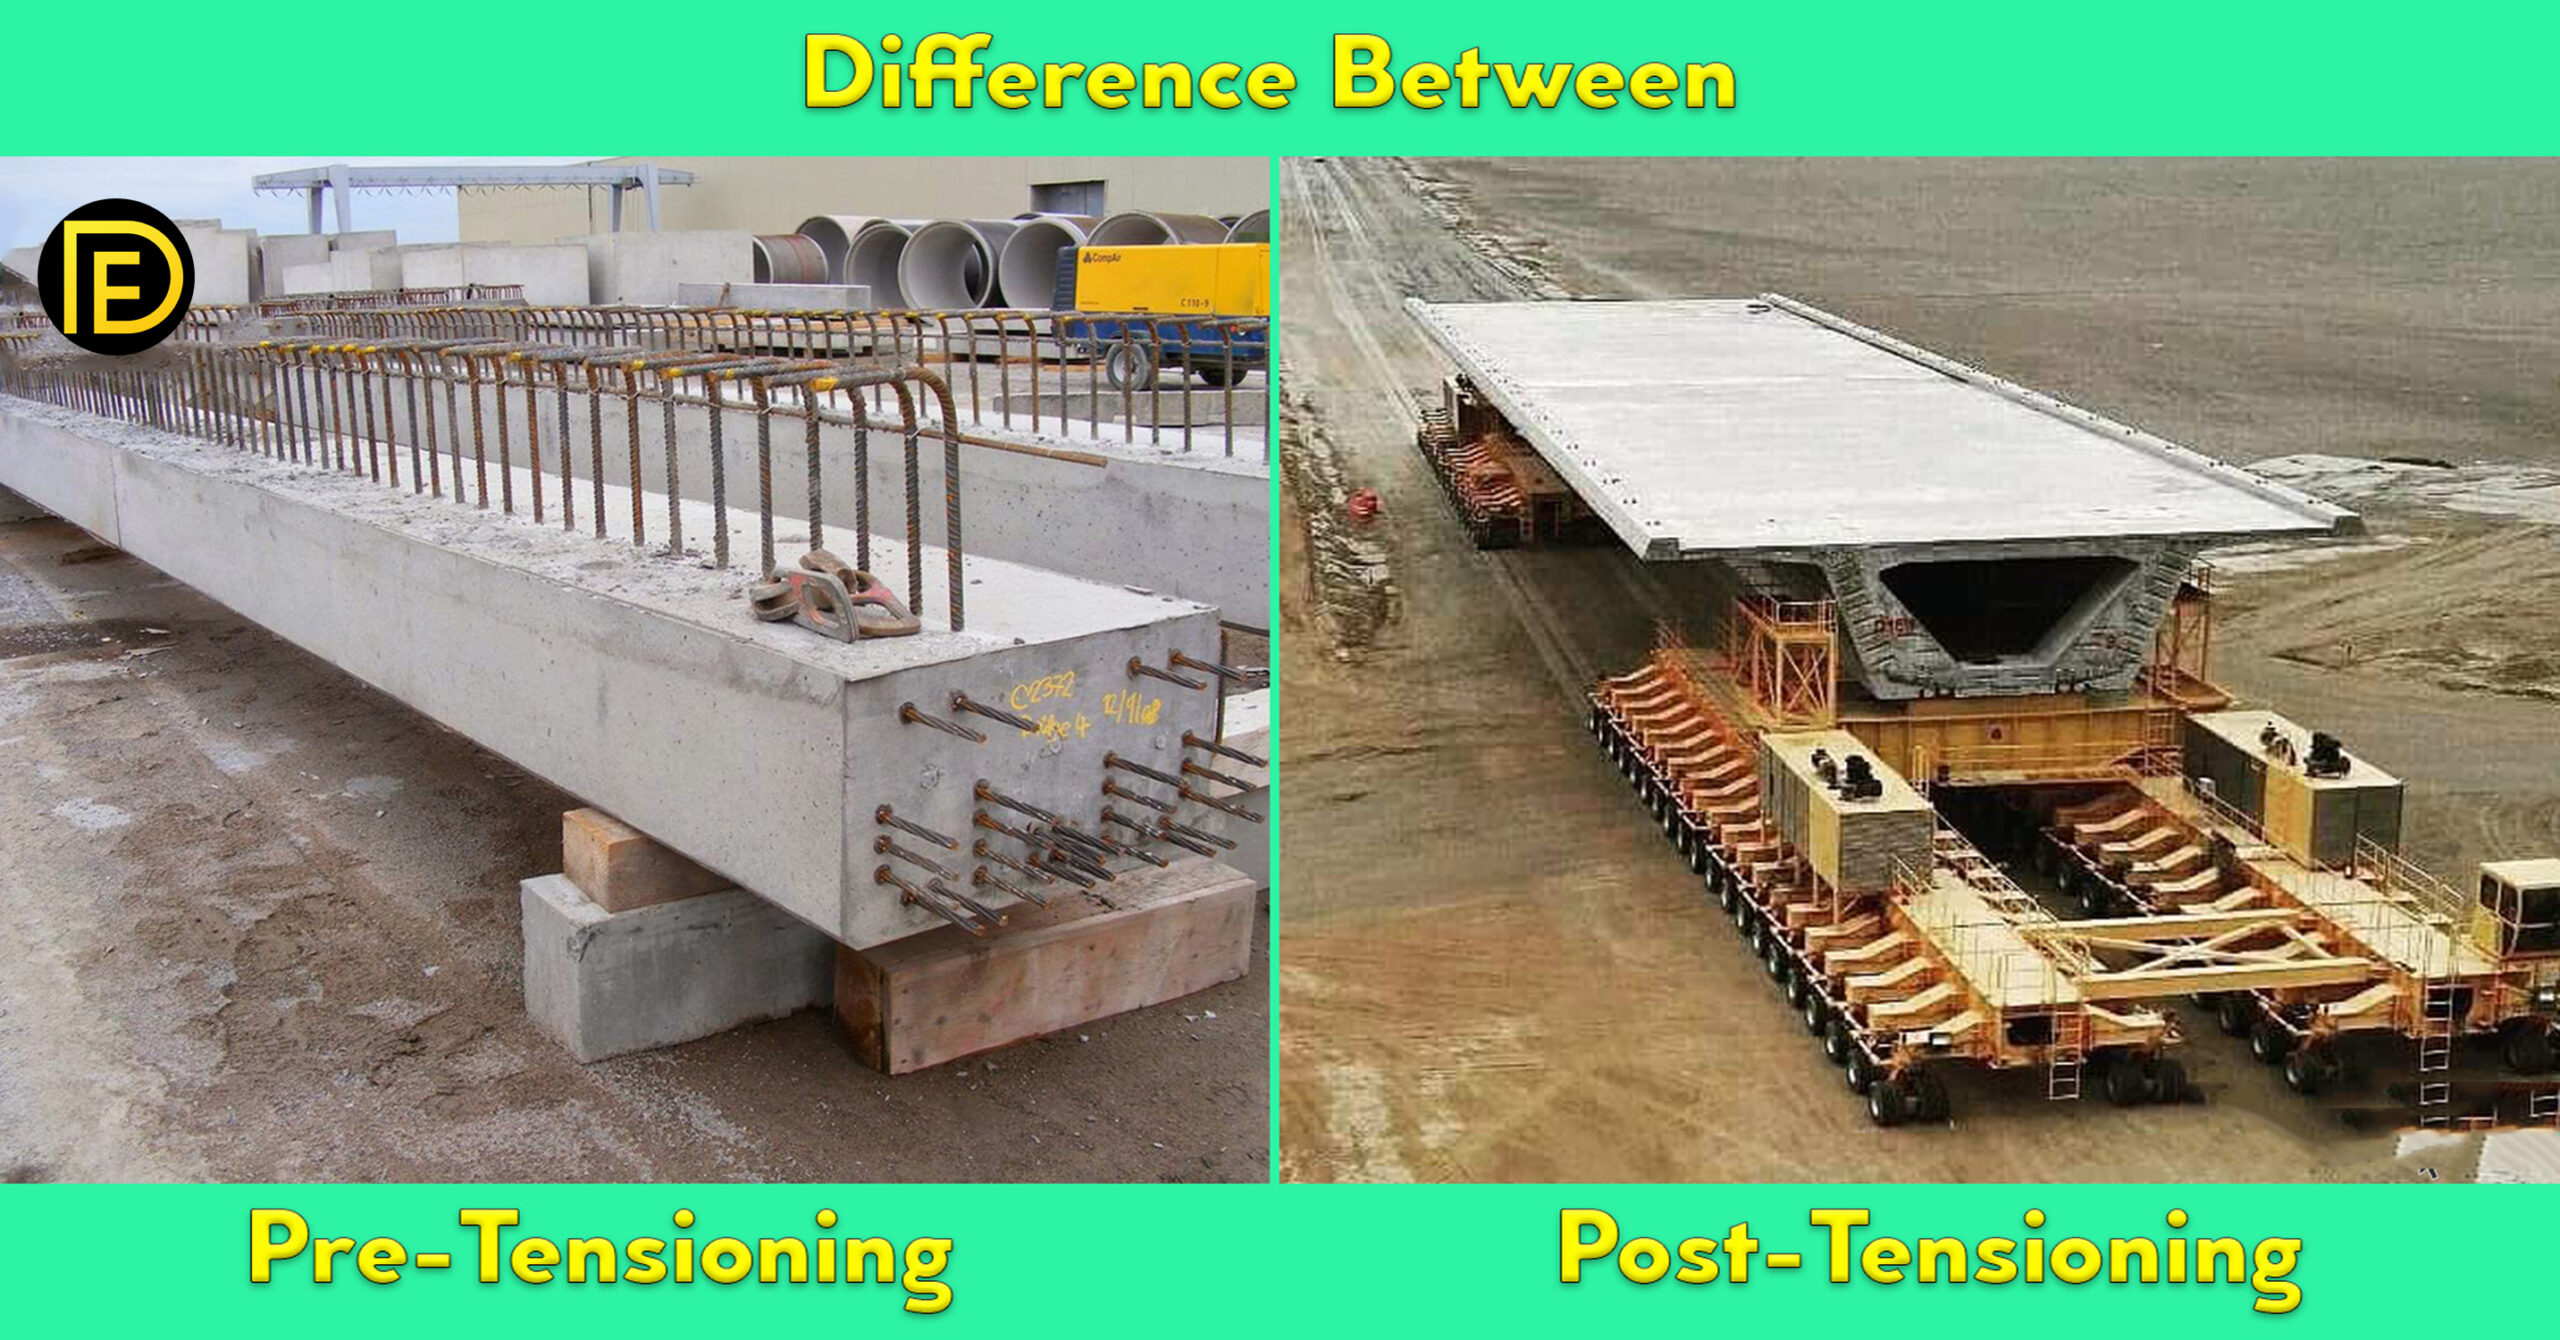 difference-between-pre-tensioning-and-post-tensioning-concrete-daily-engineering